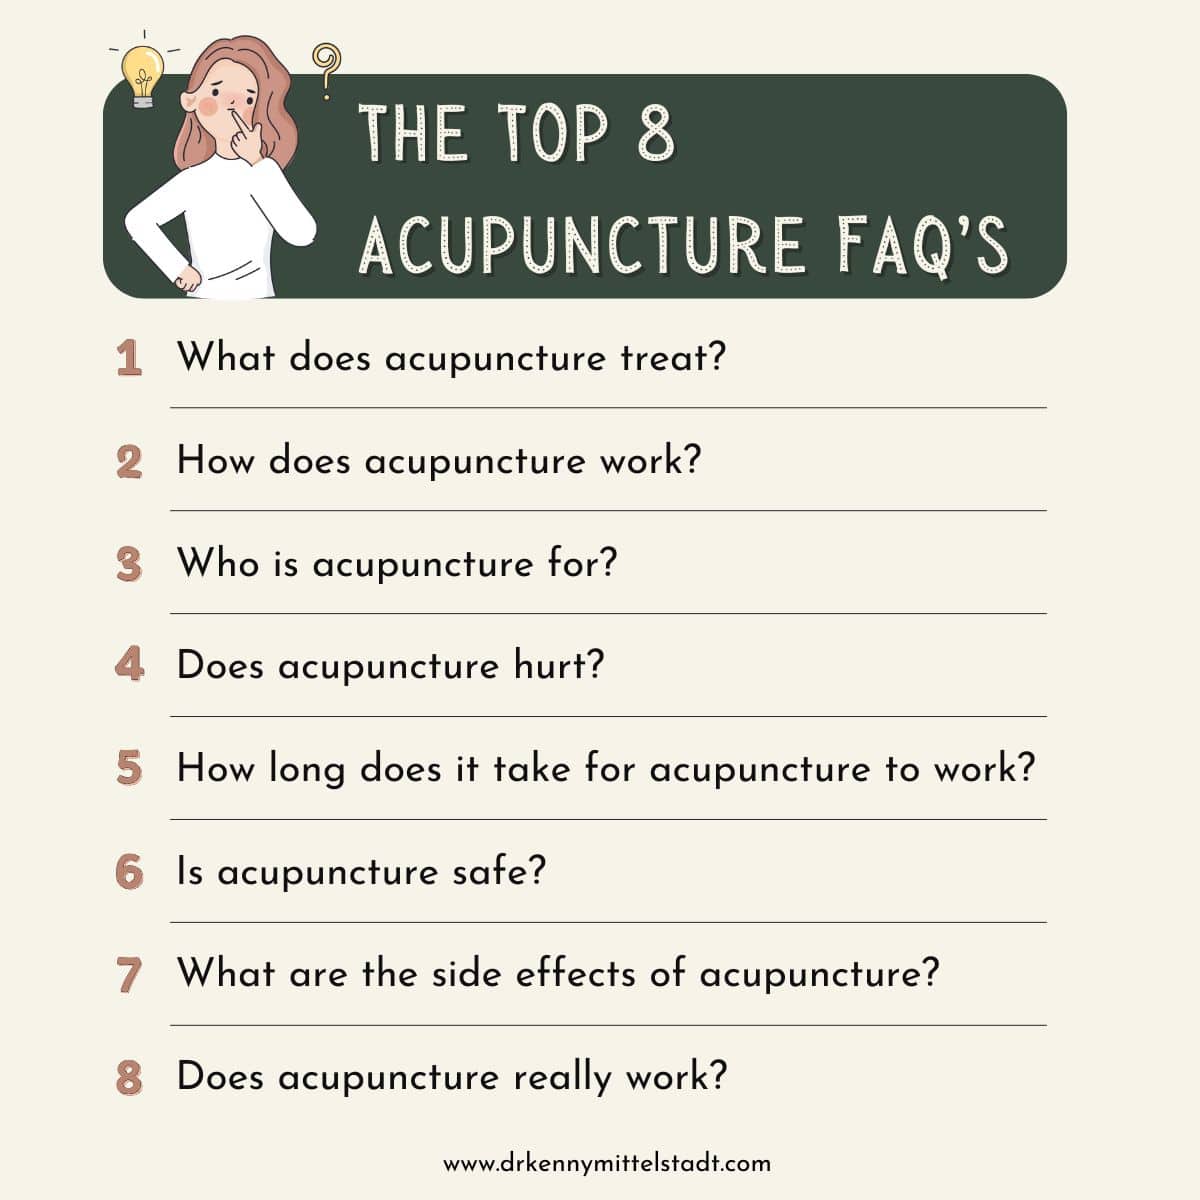 This image lists the 8 FAQ's related to acupuncture that this blog post explores in the content.